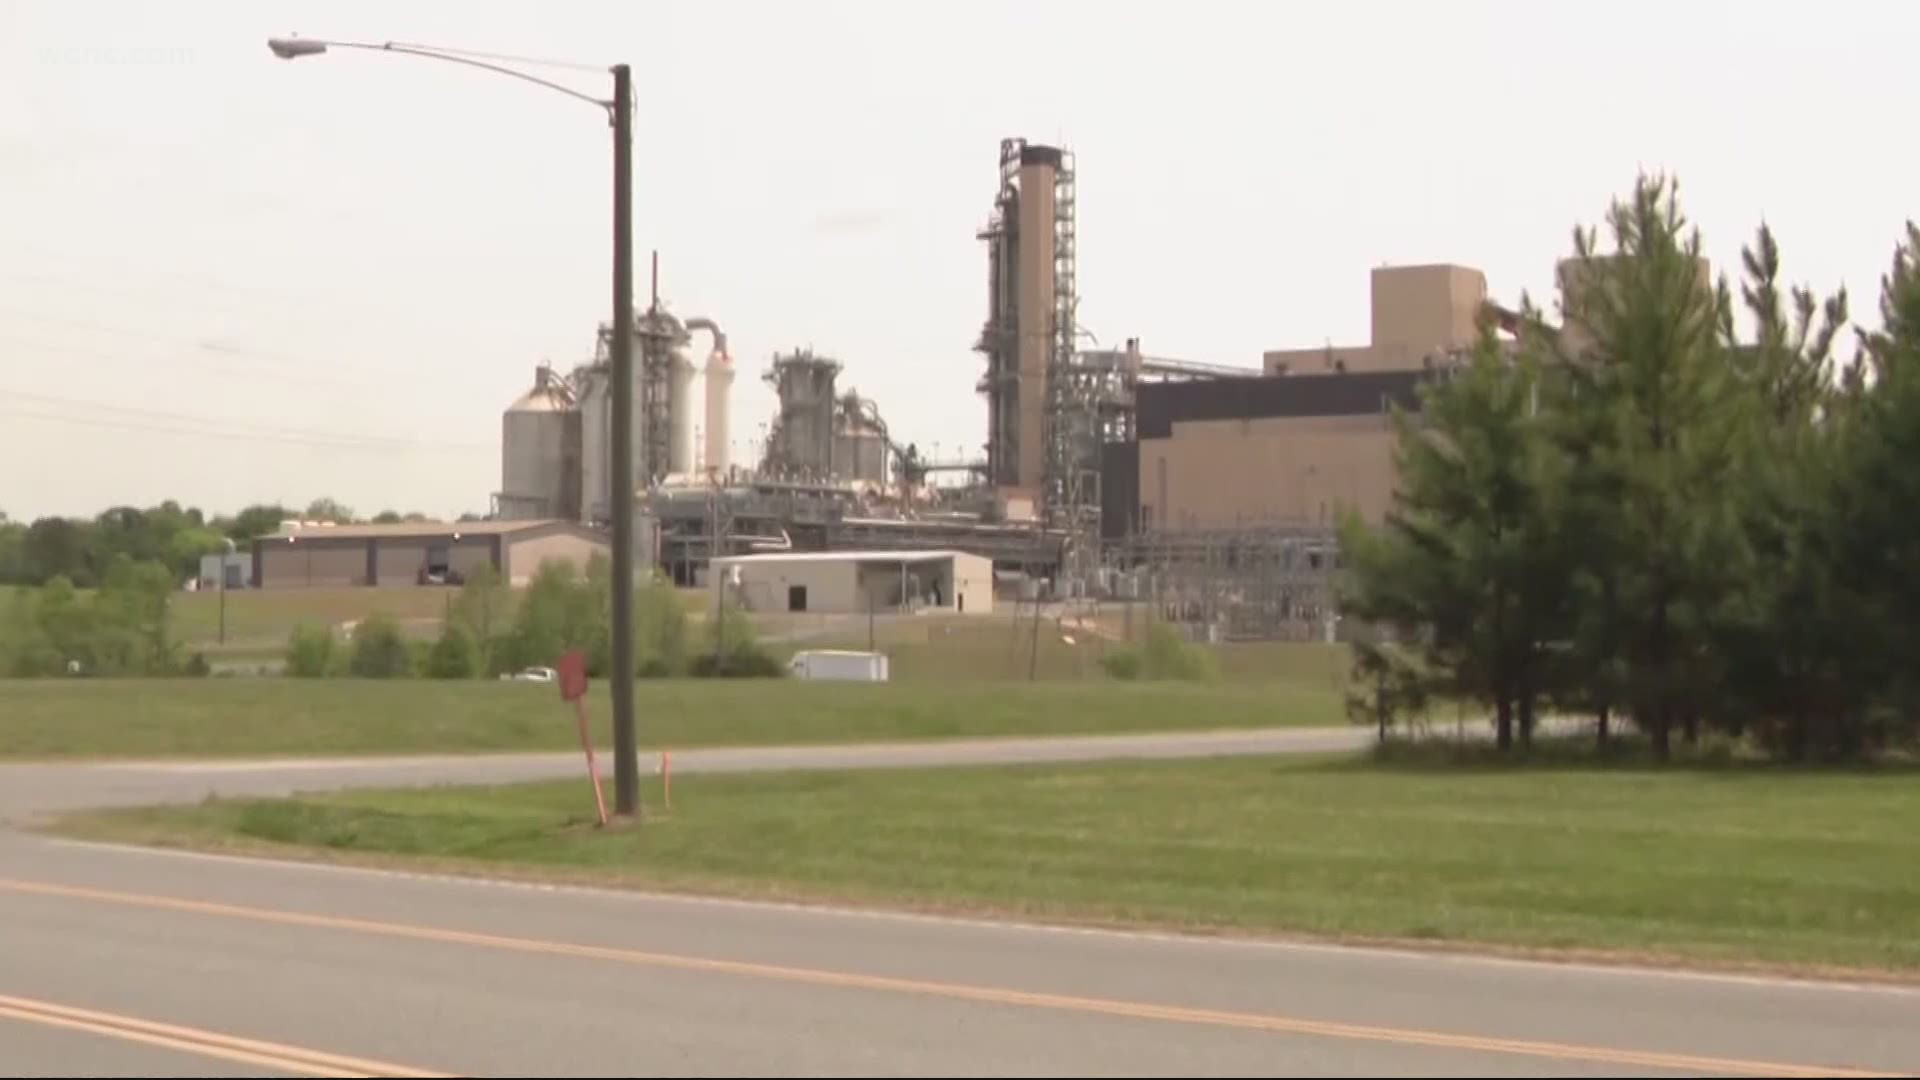 The lawsuit says the bad odor is leading to property damages in Catawba, SC.